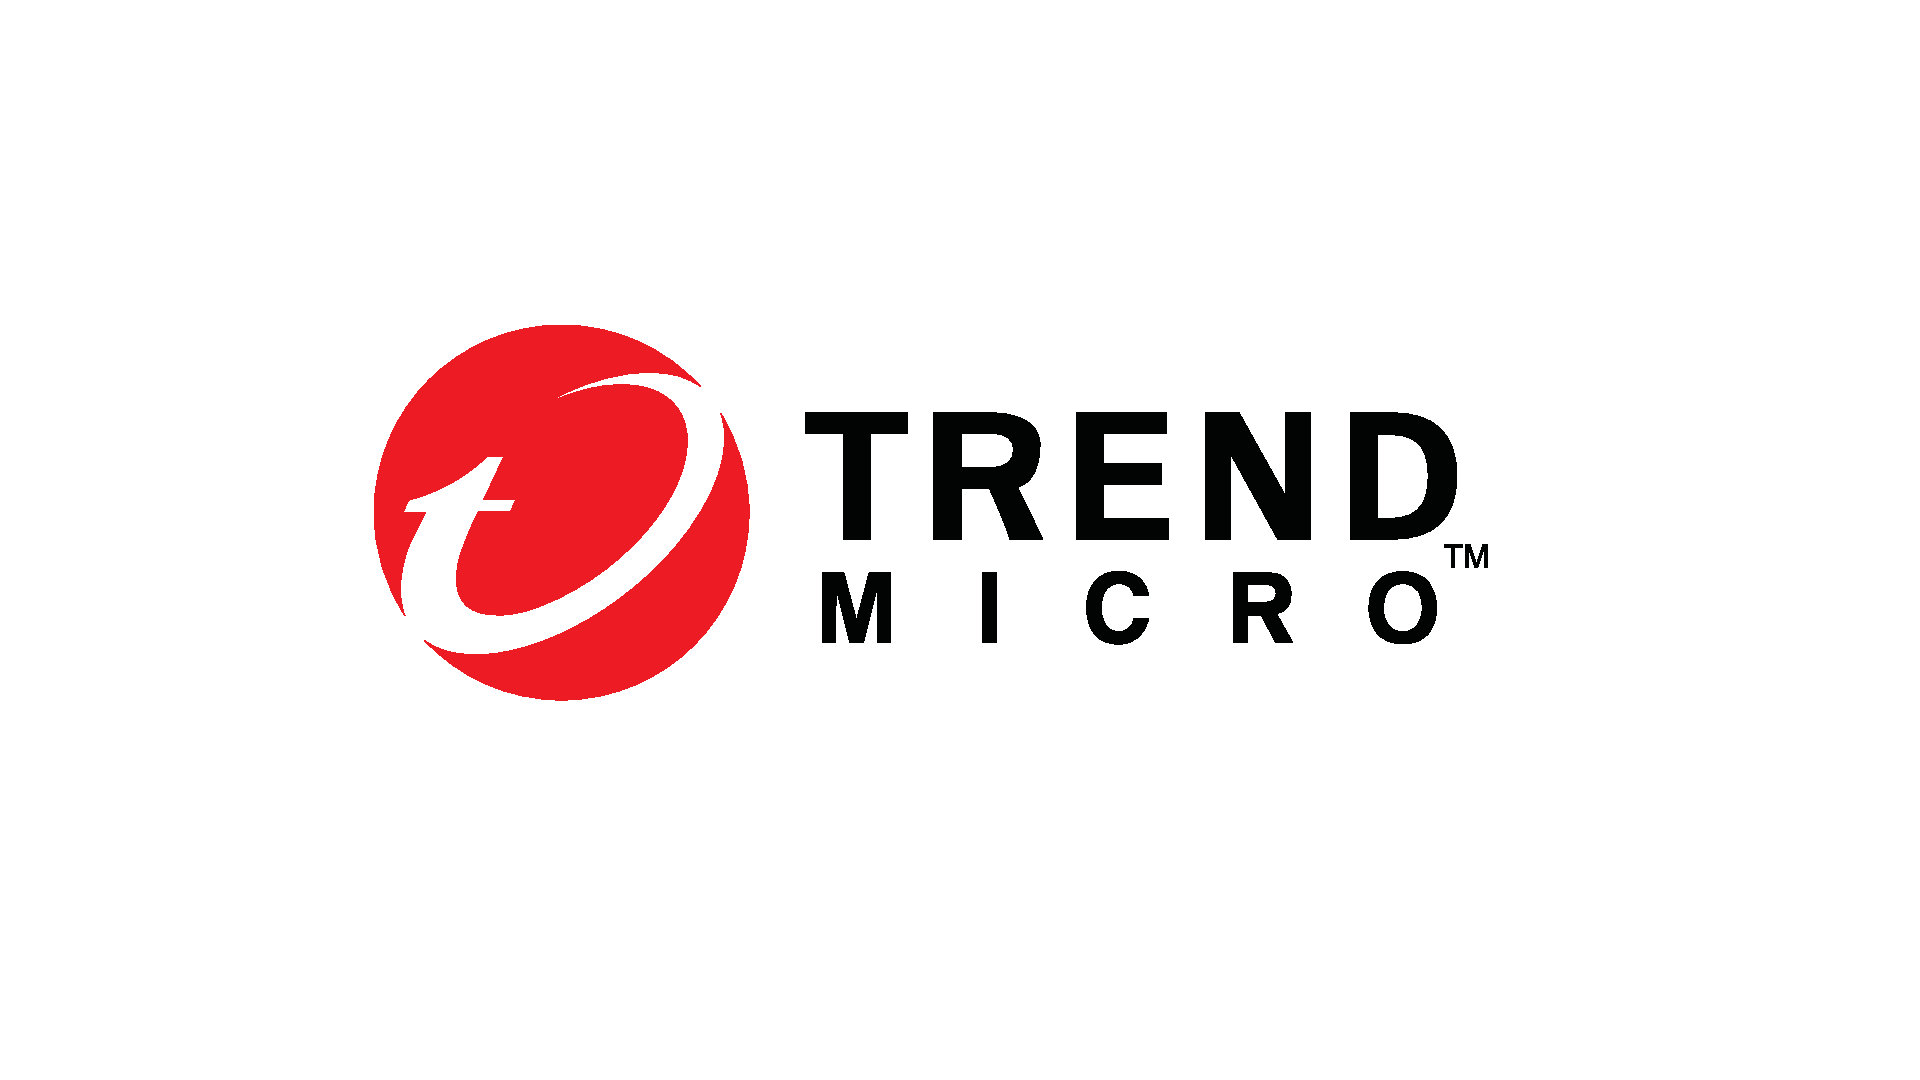 Protect your desktops, notebooks and servers with an innovative combination of top class web-based Malware protection both within and outside of the network using the Trend Micro Smart Protection Network. The new file reputation lowers the strain on final point resources with web-based pattern files. Furthermore, access to bad websites is blocked using web reputation.